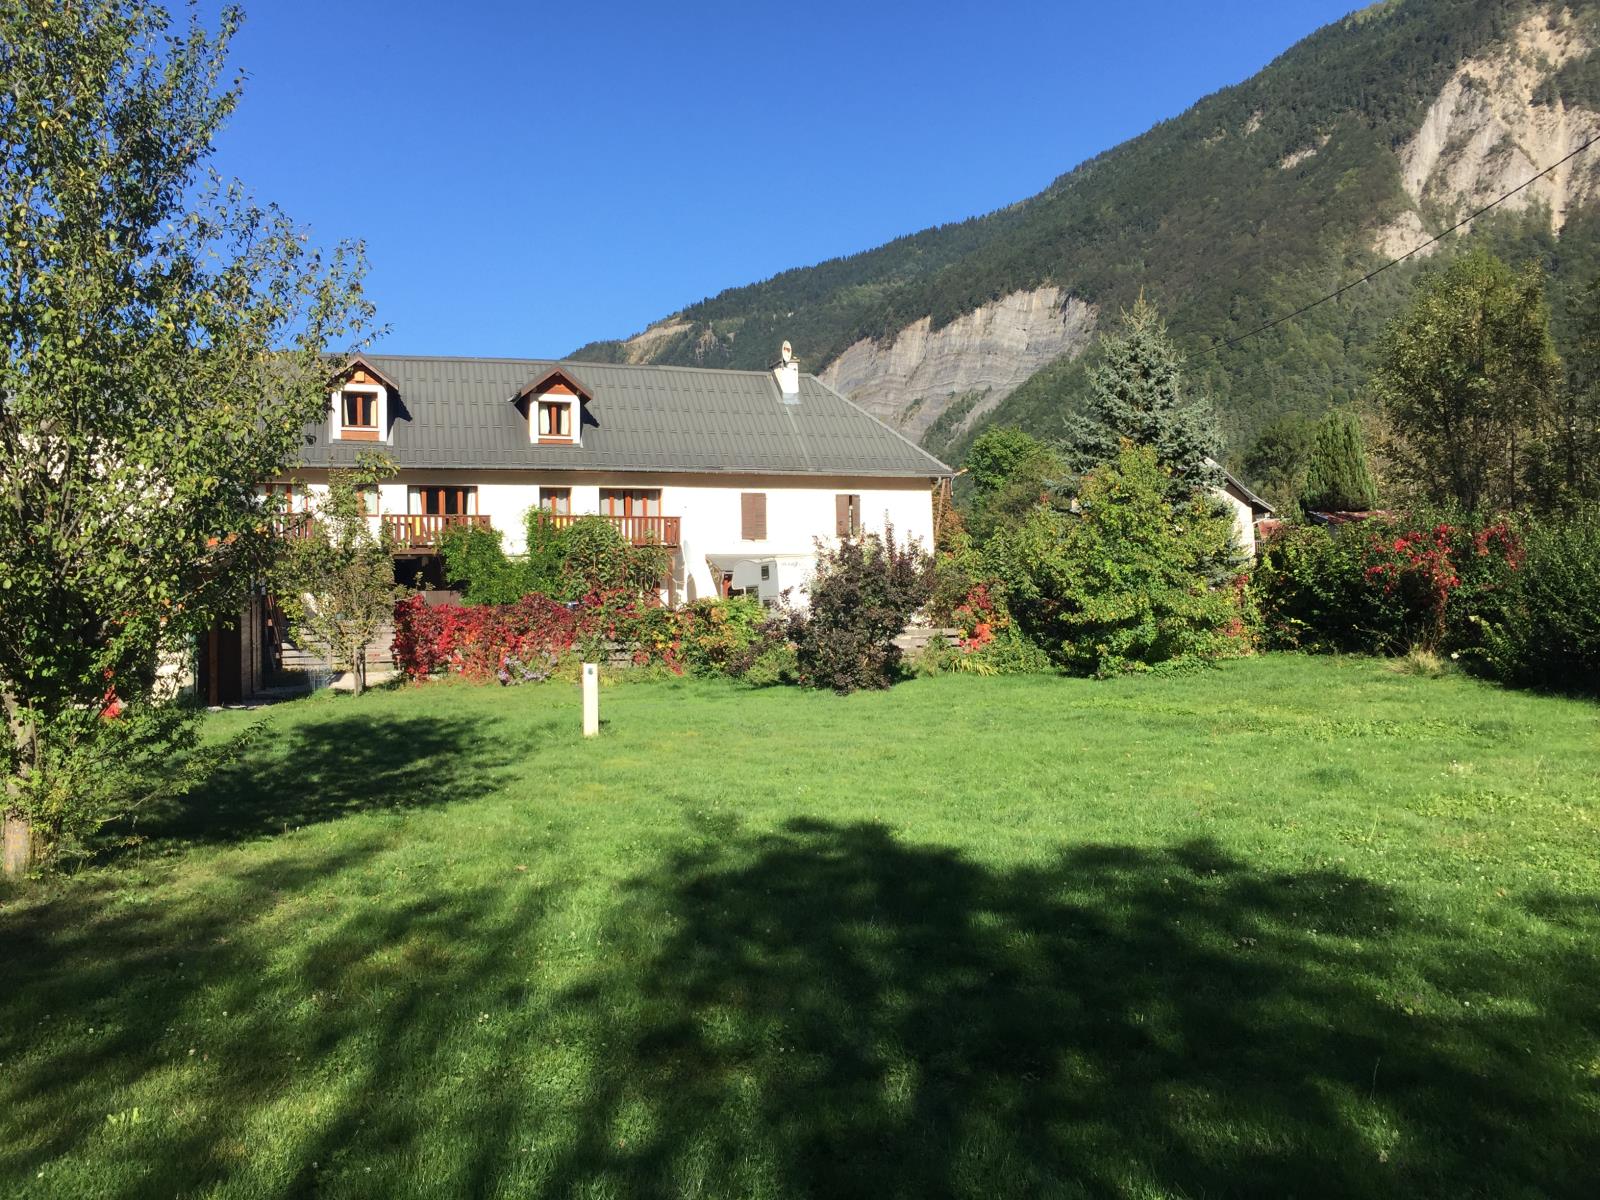 Accommodation - Middle Barn : One Of Our Properties At Ferme Noemie, Bourg D'oisans. - Camping la Ferme Noémie